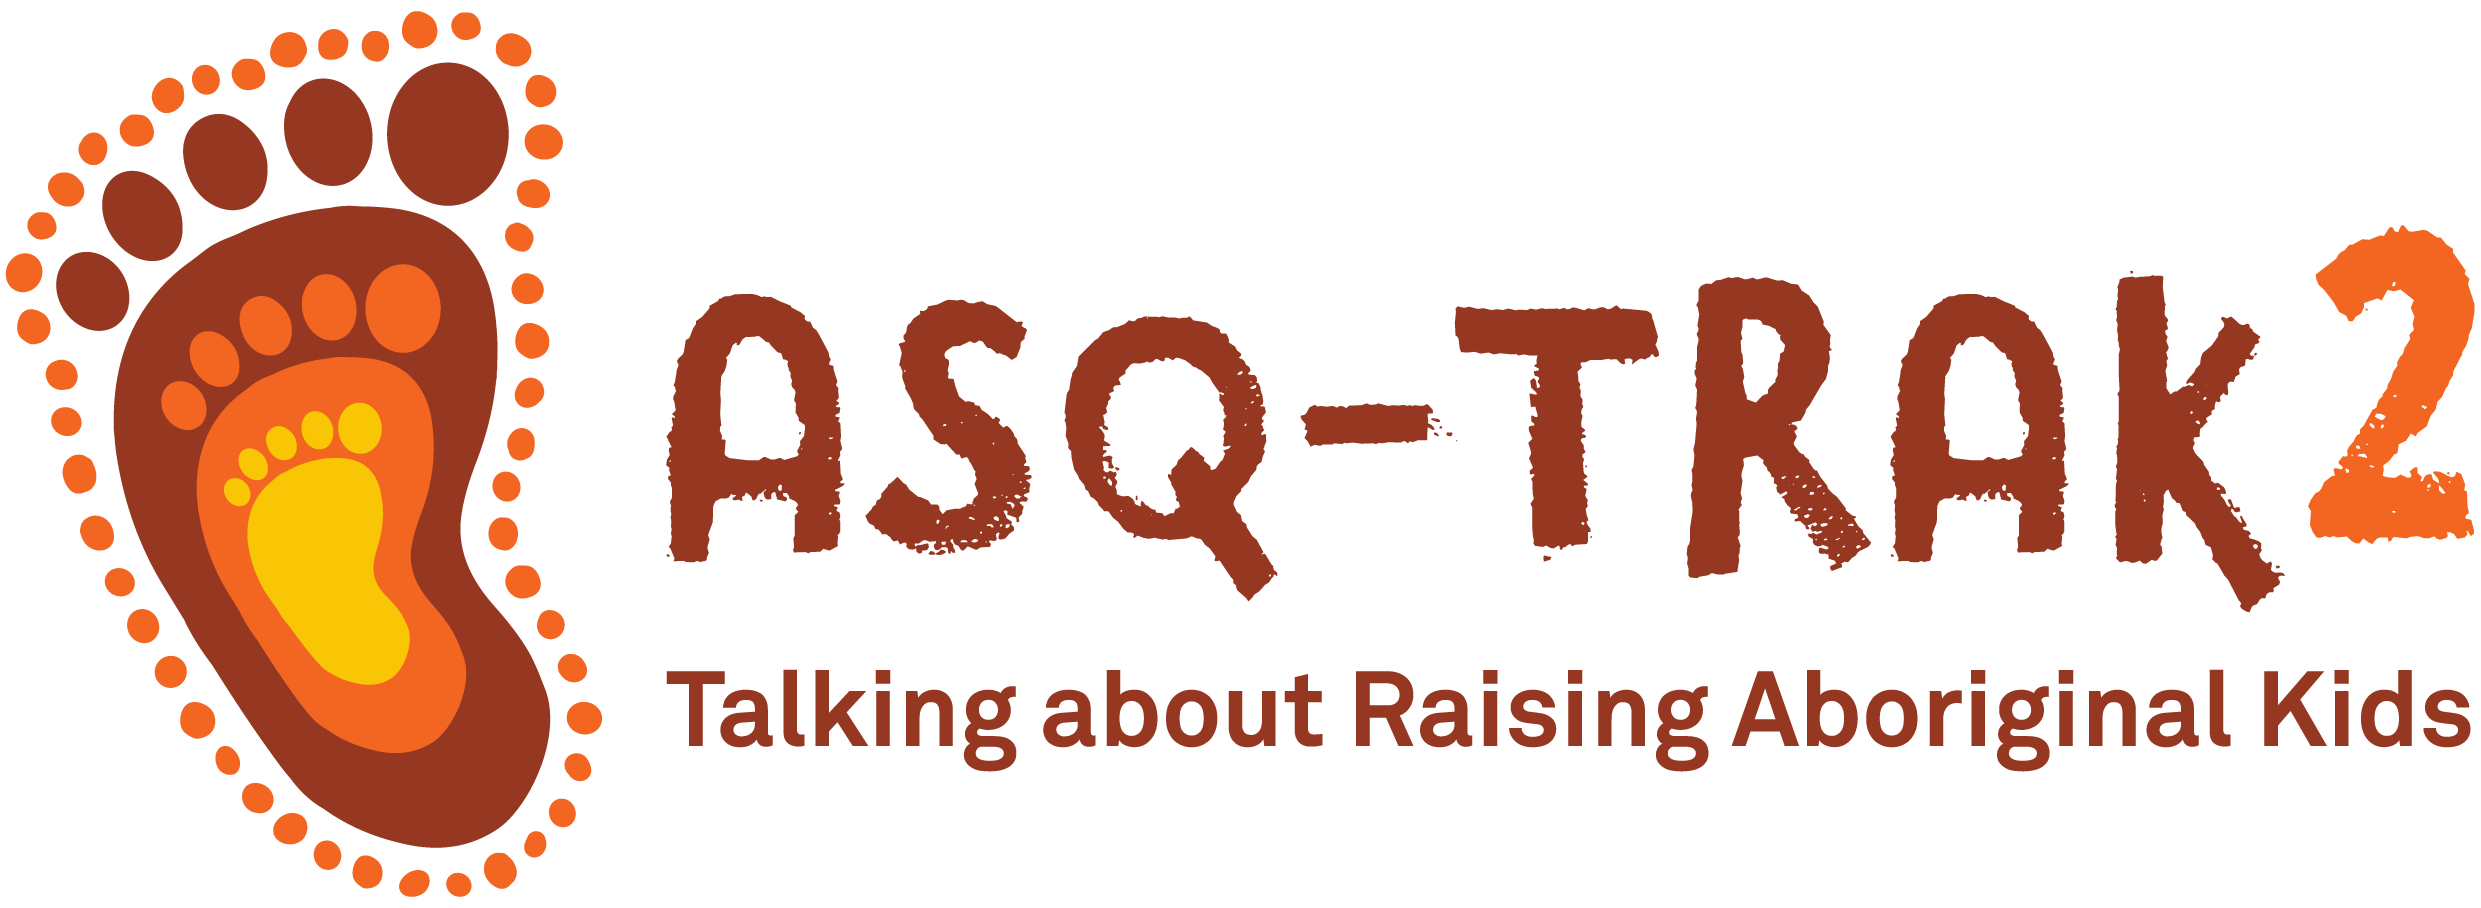 This is the ASQ-TRAK2 logo.